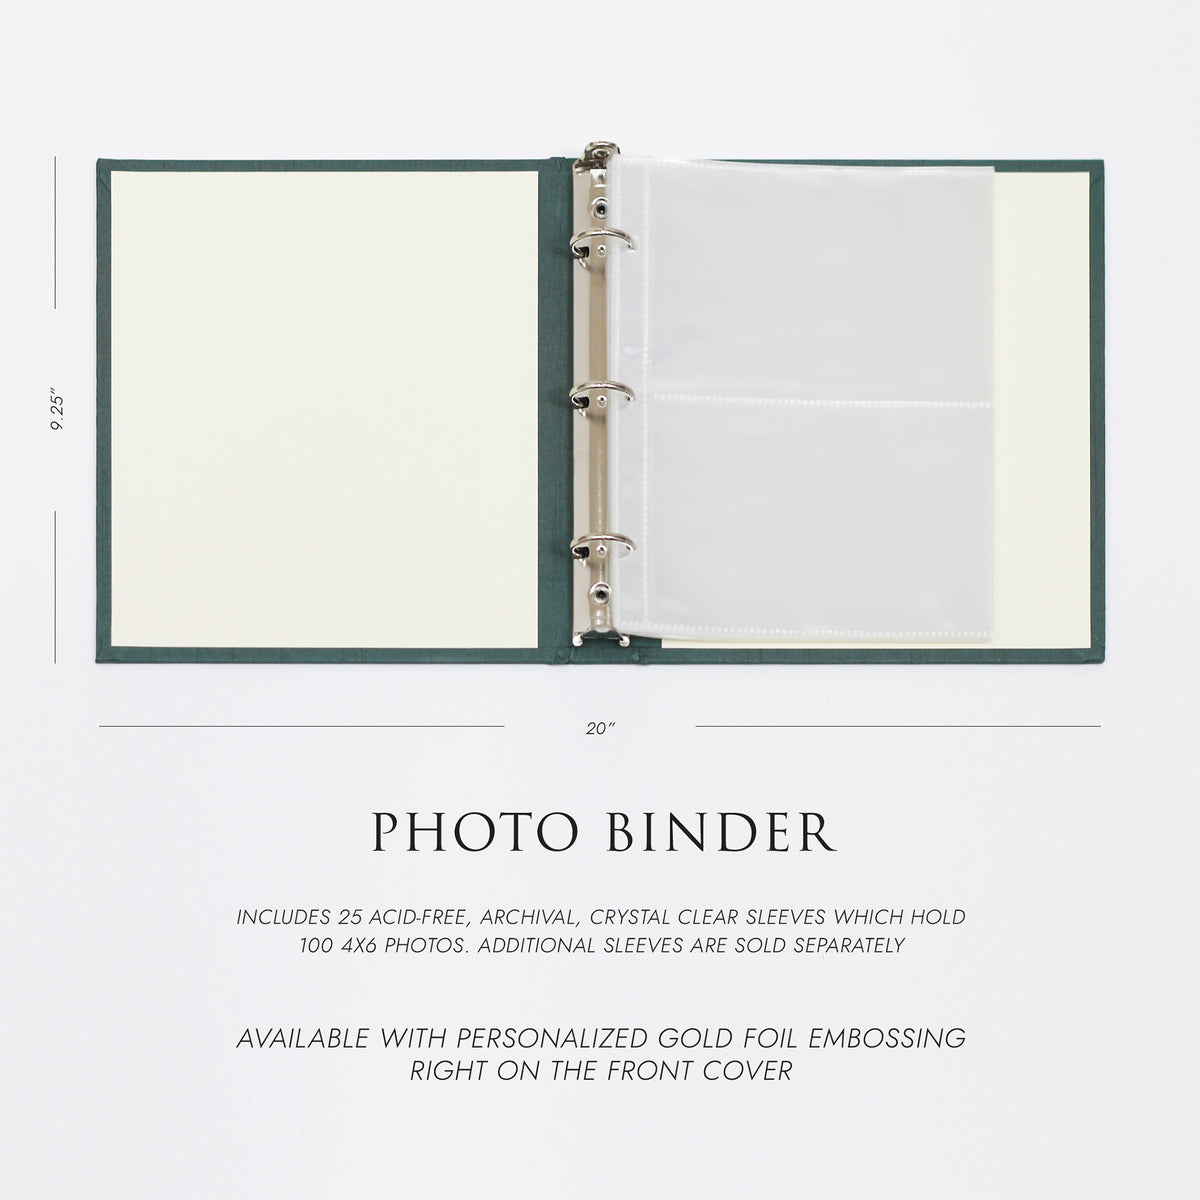 Medium Photo Binder | for 4 x 6 photos | with Champagne Silk Cover